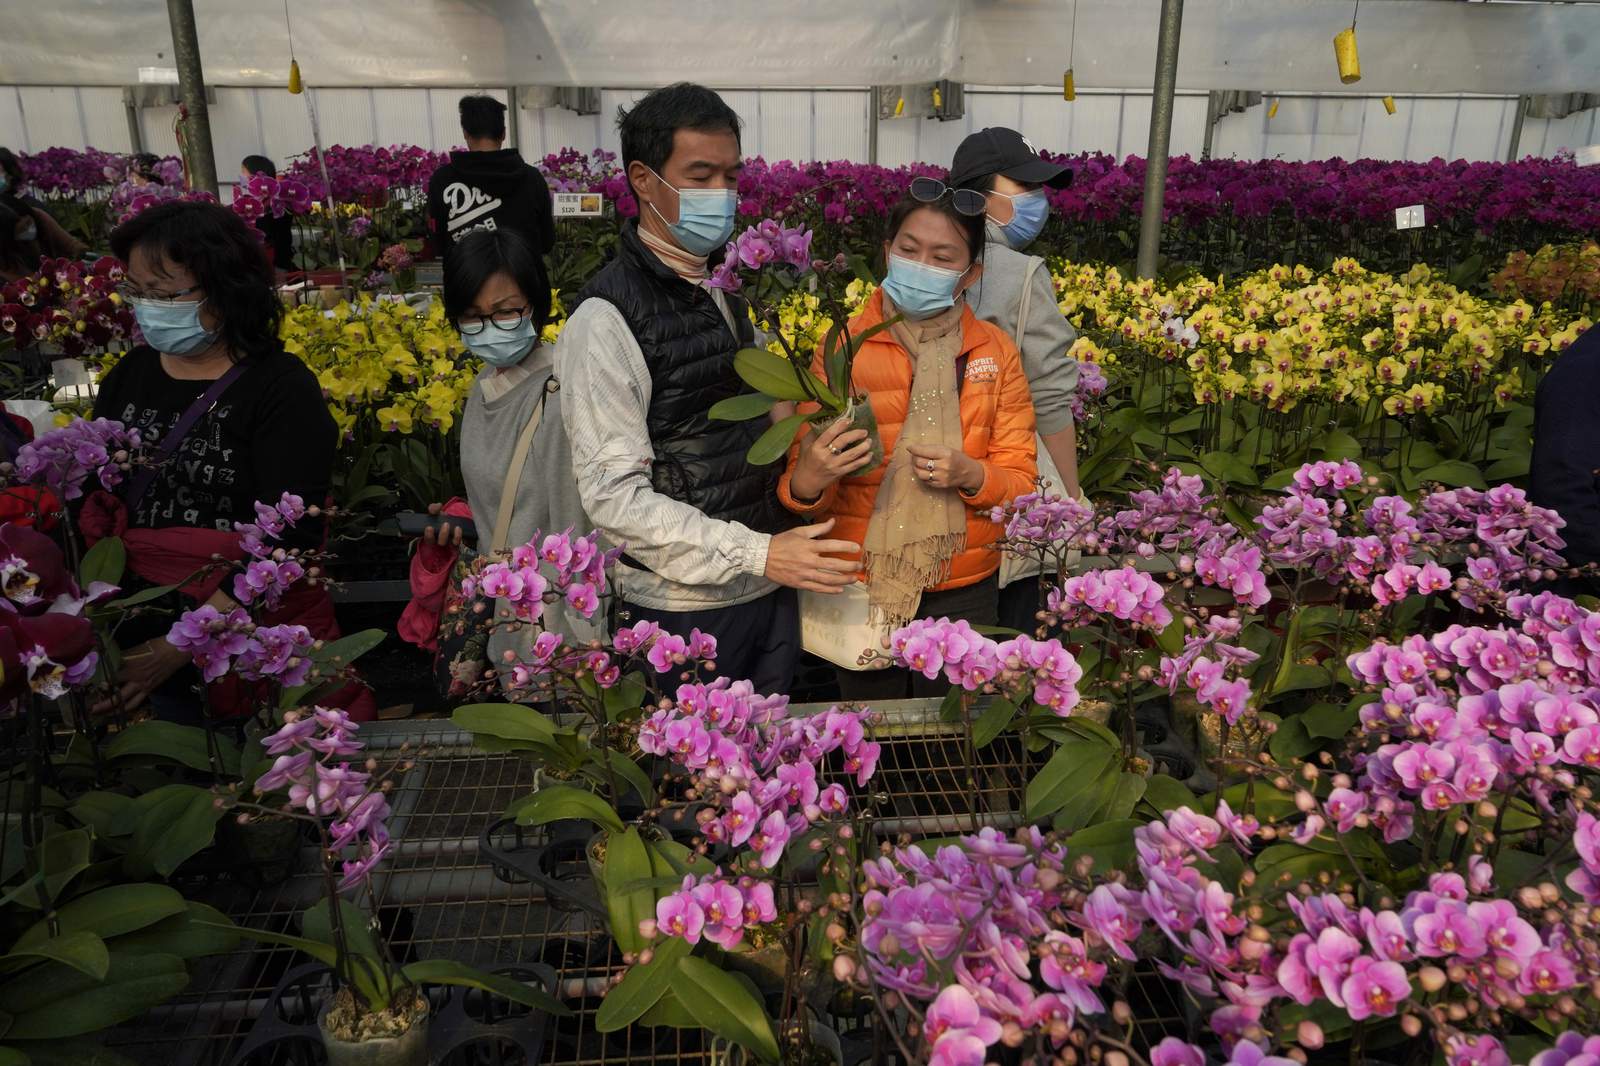 Flower farms see their Lunar New Year sales wilted by virus